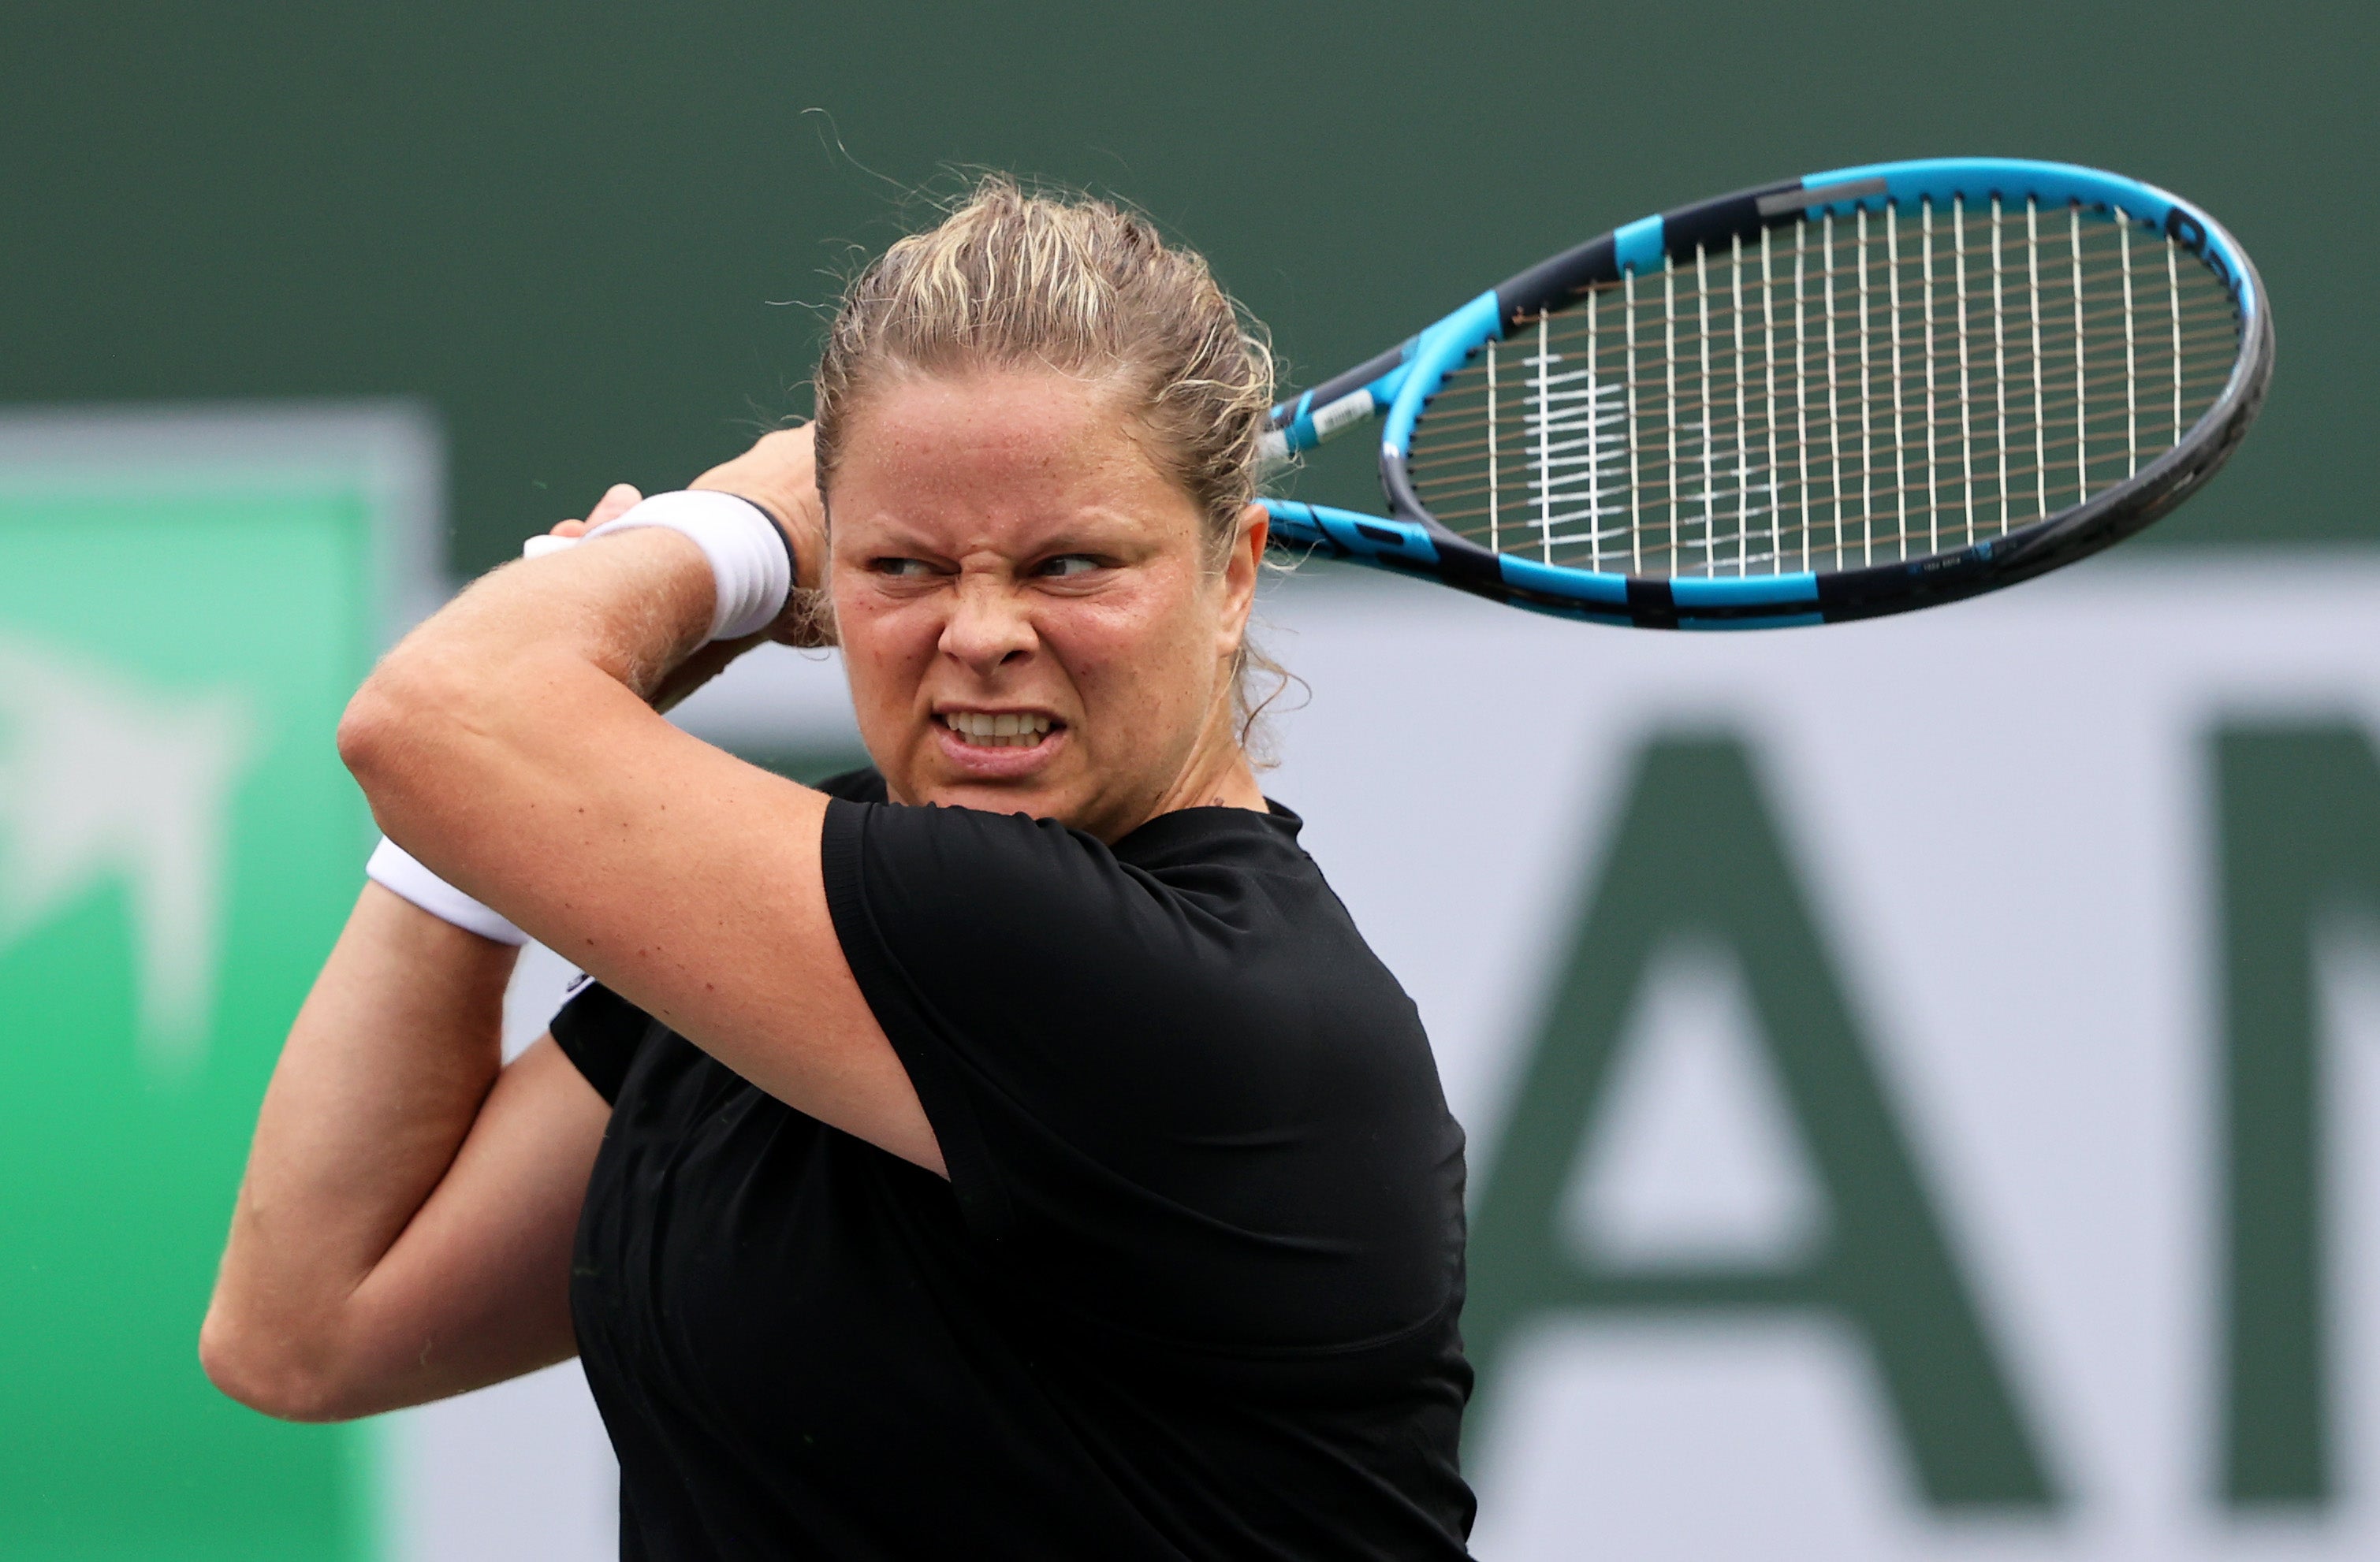 Kim Clijsters was defeated over three sets